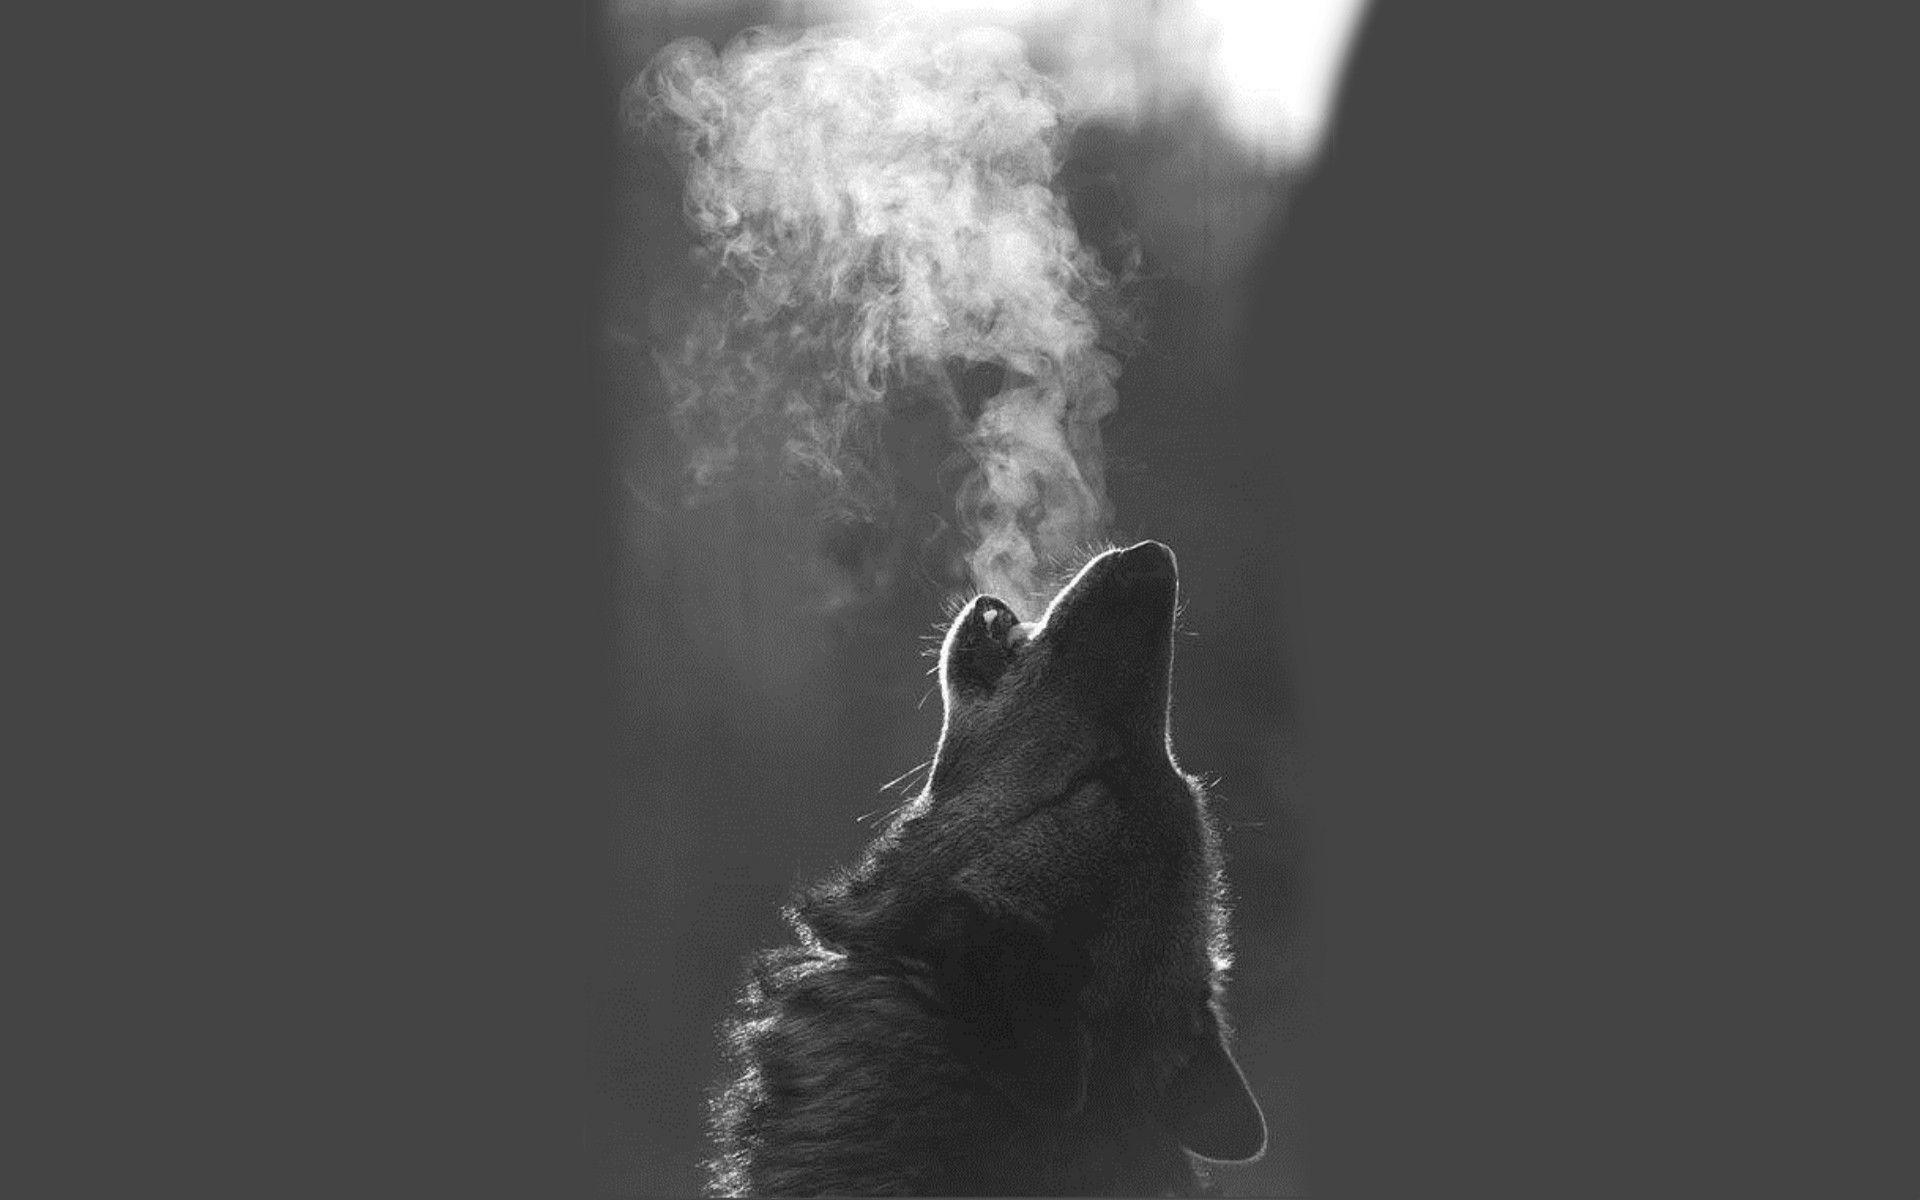 Black Wolf HD Wallpapers - Wallpaper Cave